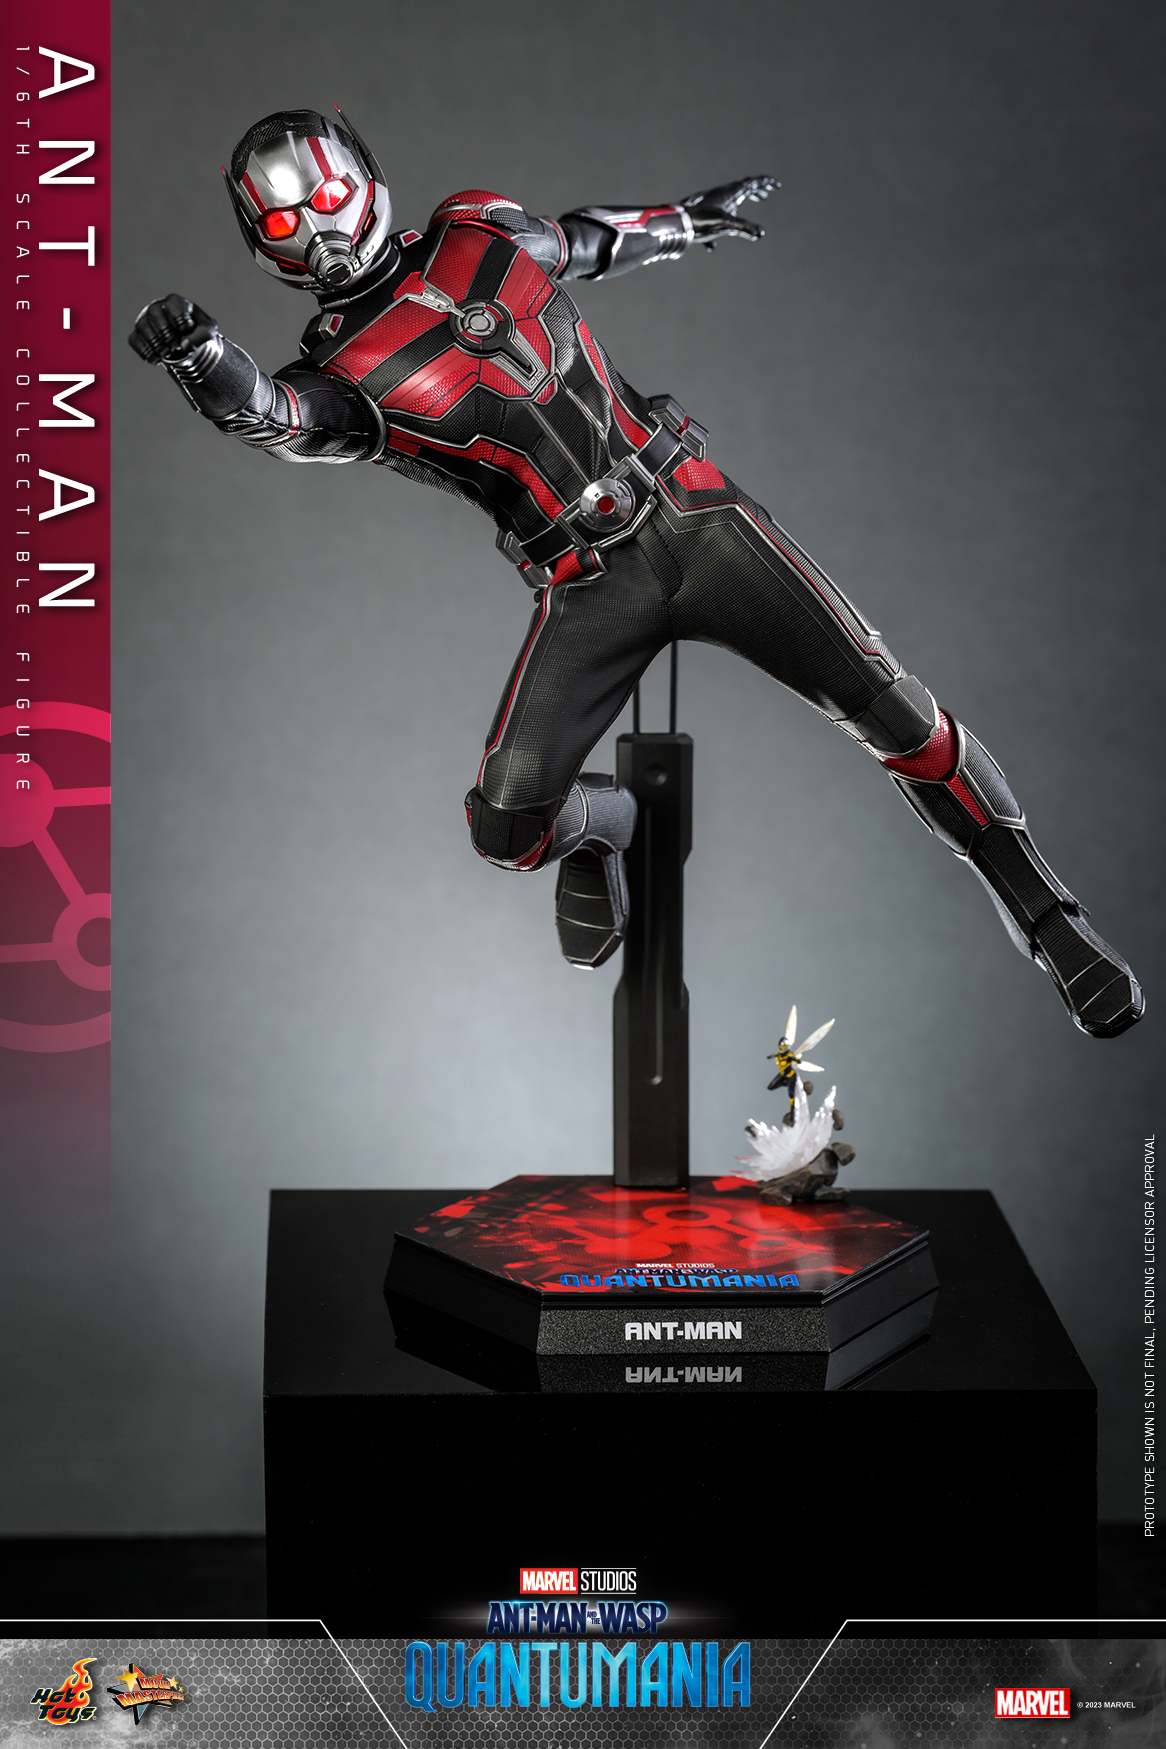 Hot Toys - Ant-Man 3 - Ant-Man collectible figure_PR1